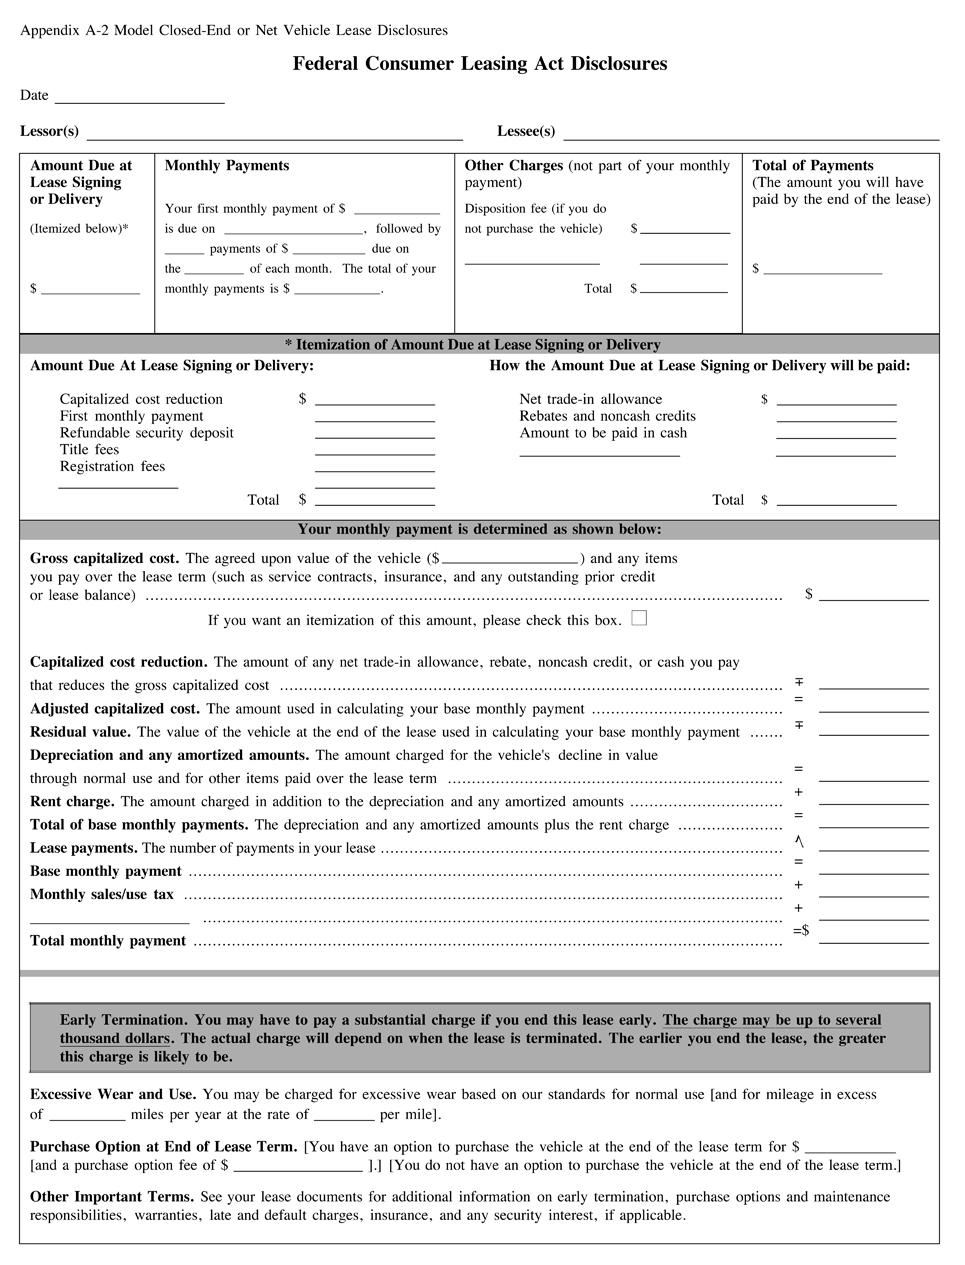 A-2—Model Closed-End or Net Vehicle Lease Disclosures Page 1